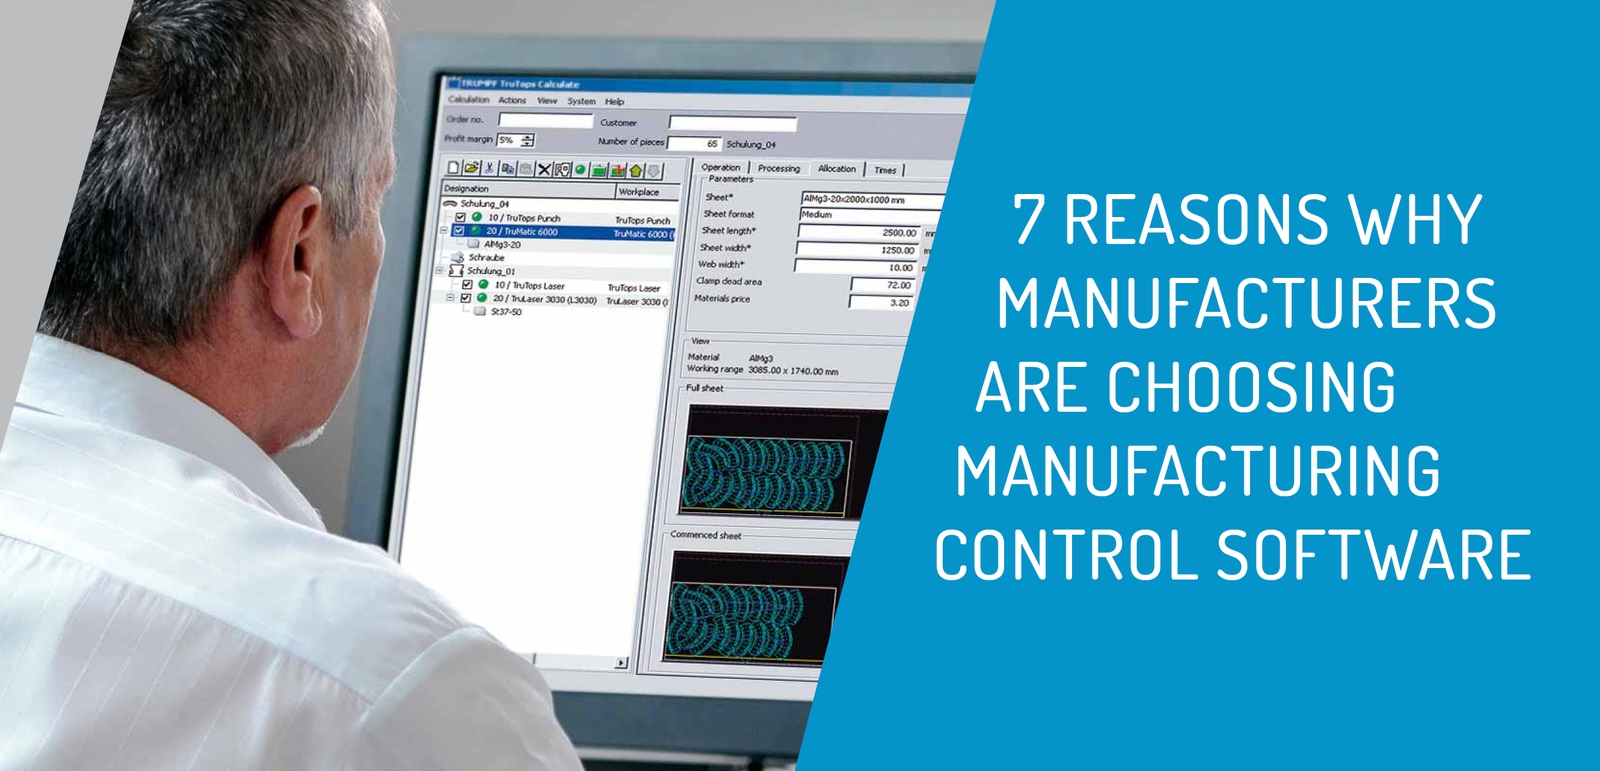 7 Reasons Manufacturers Are Choosing Manufacturing Control Software